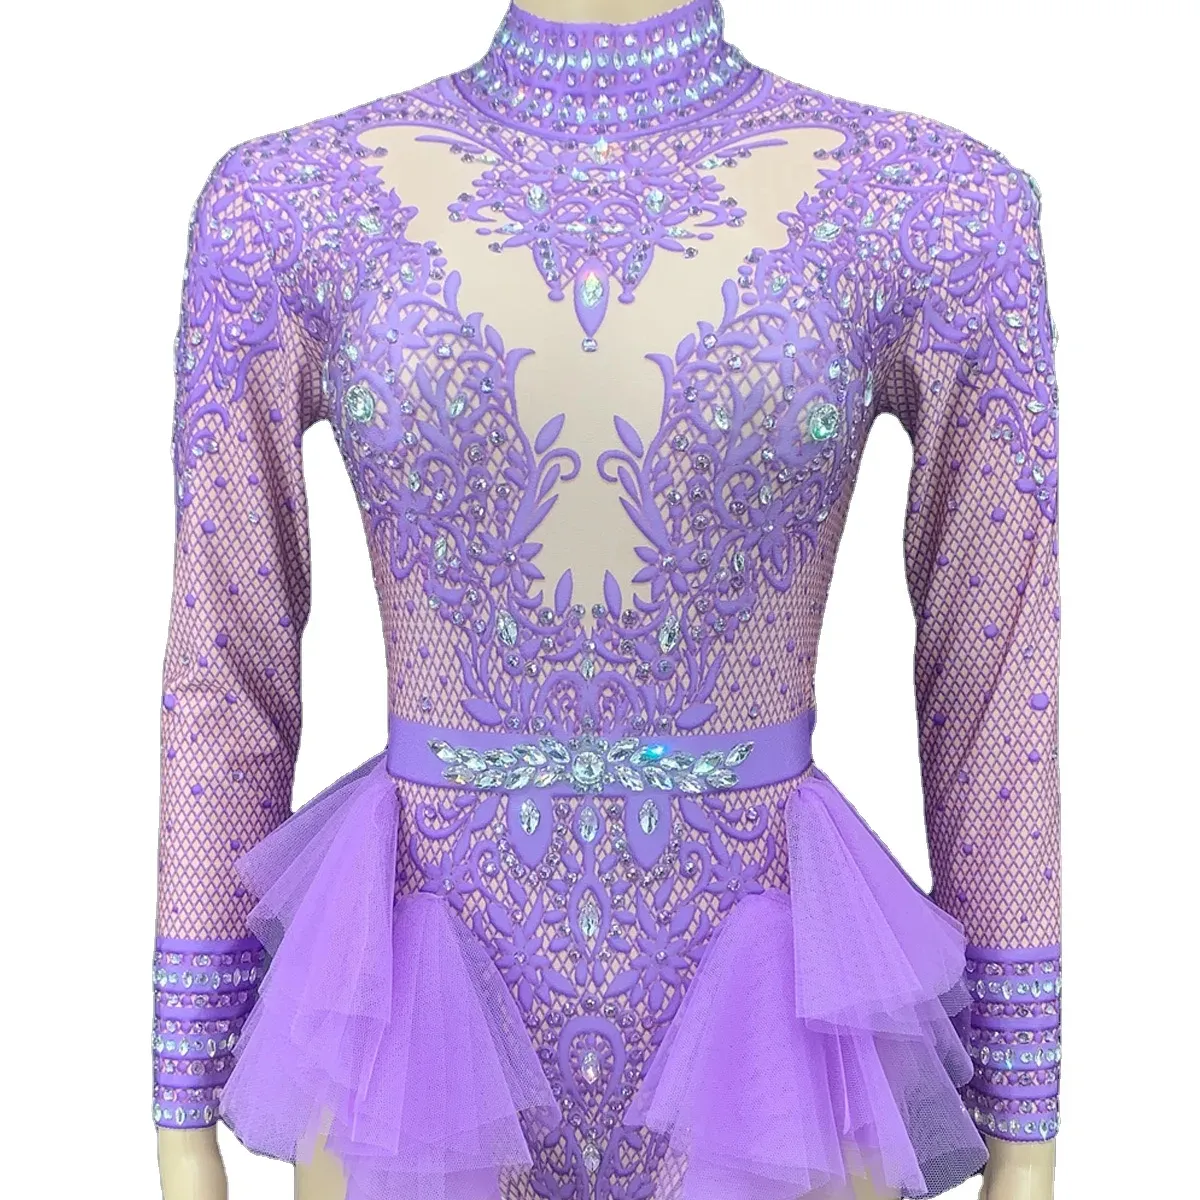 Sparkly Rhinestones Bodysuit Women Long Sleeve Club Outfit Dance Costume Sexy Show Performance Stage Wear Birthday Dress